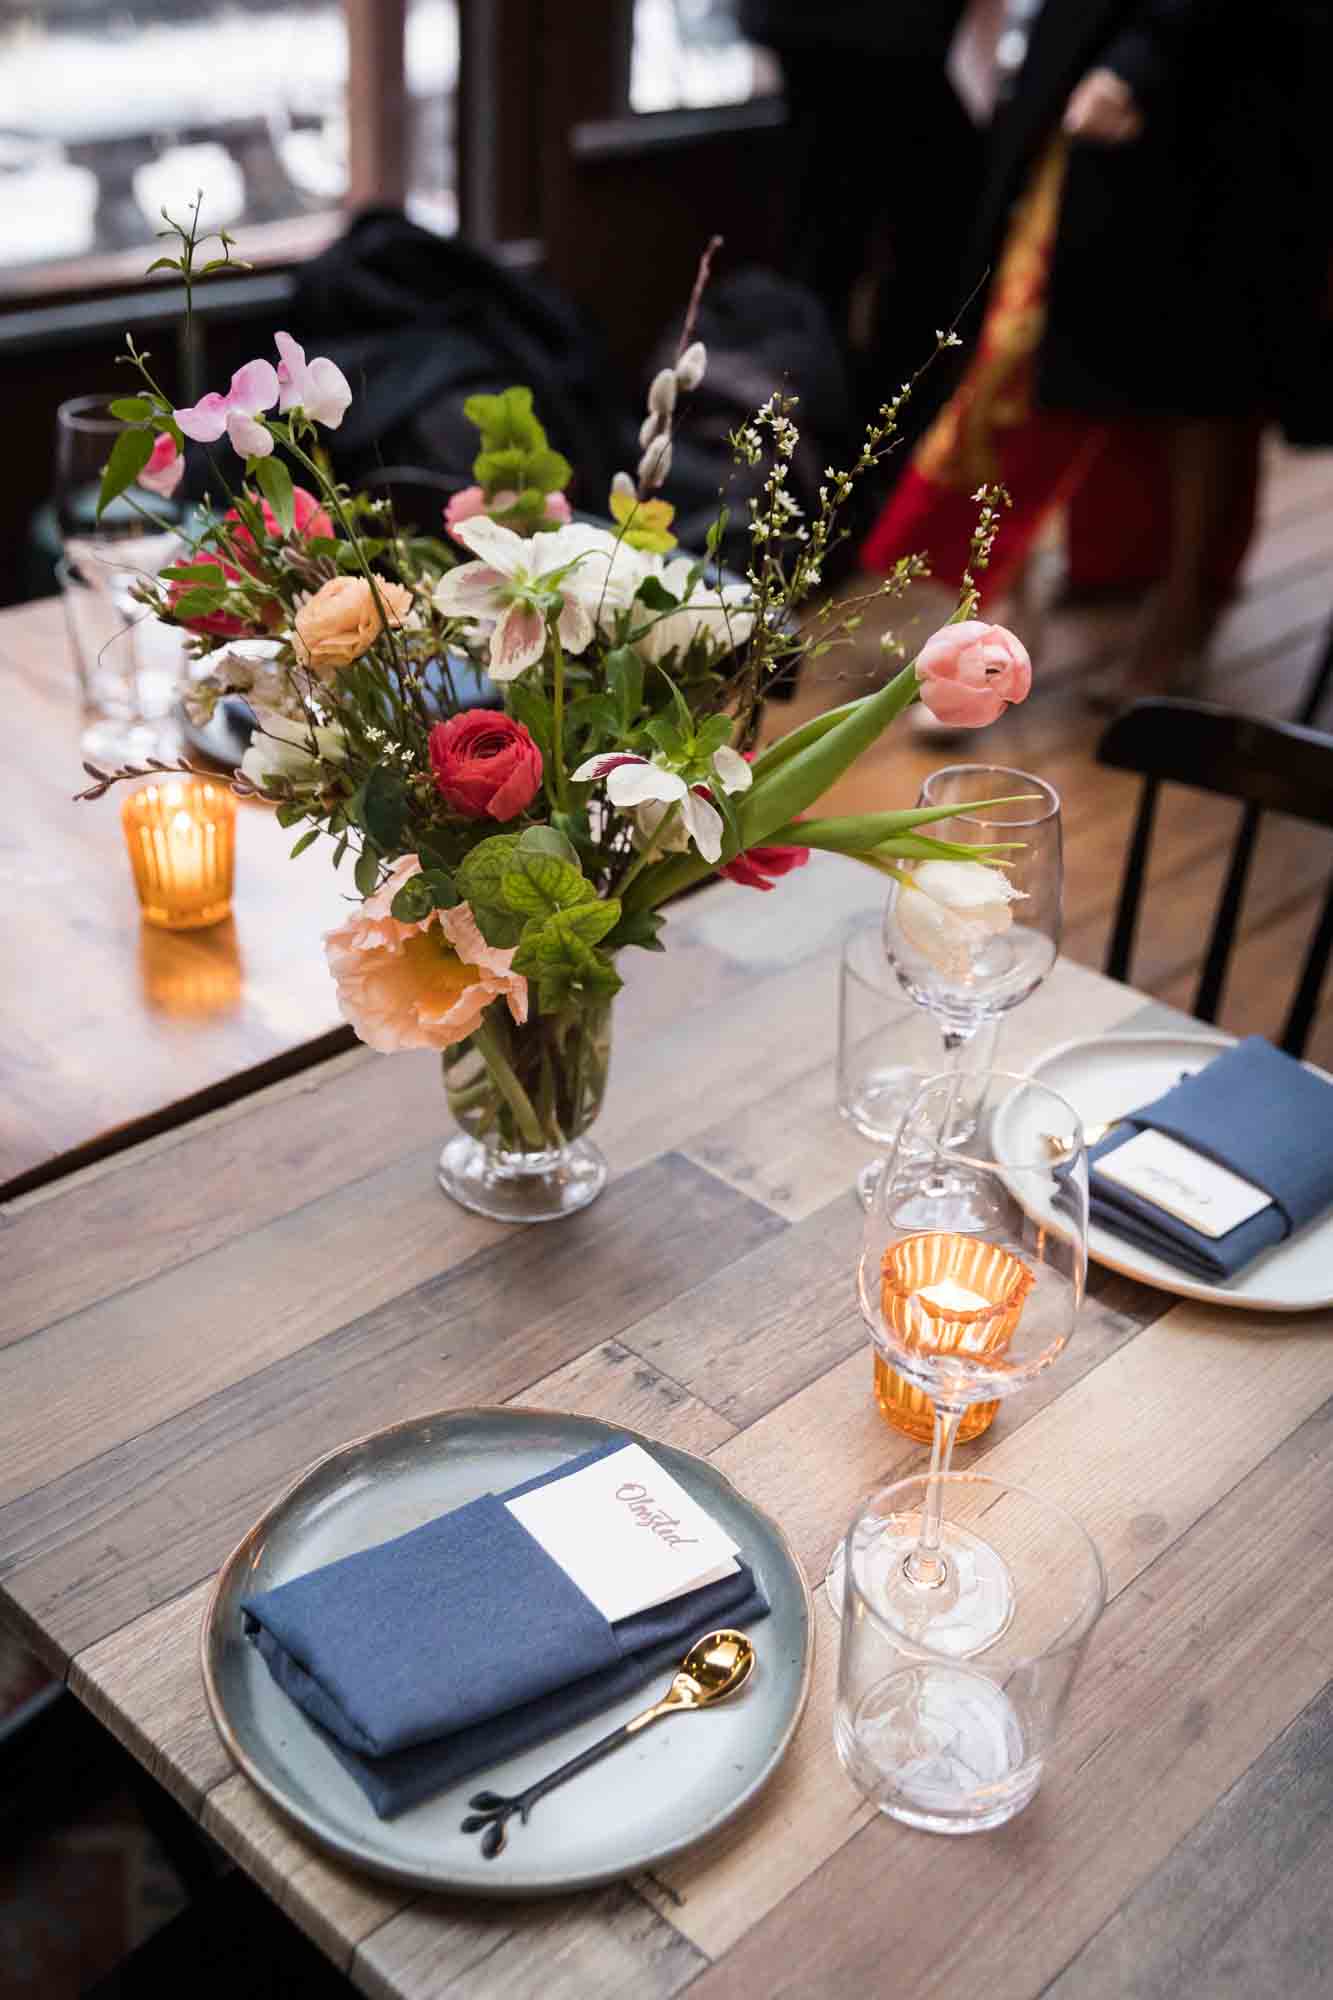 Table setting and flower centerpiece at a Brooklyn restaurant wedding